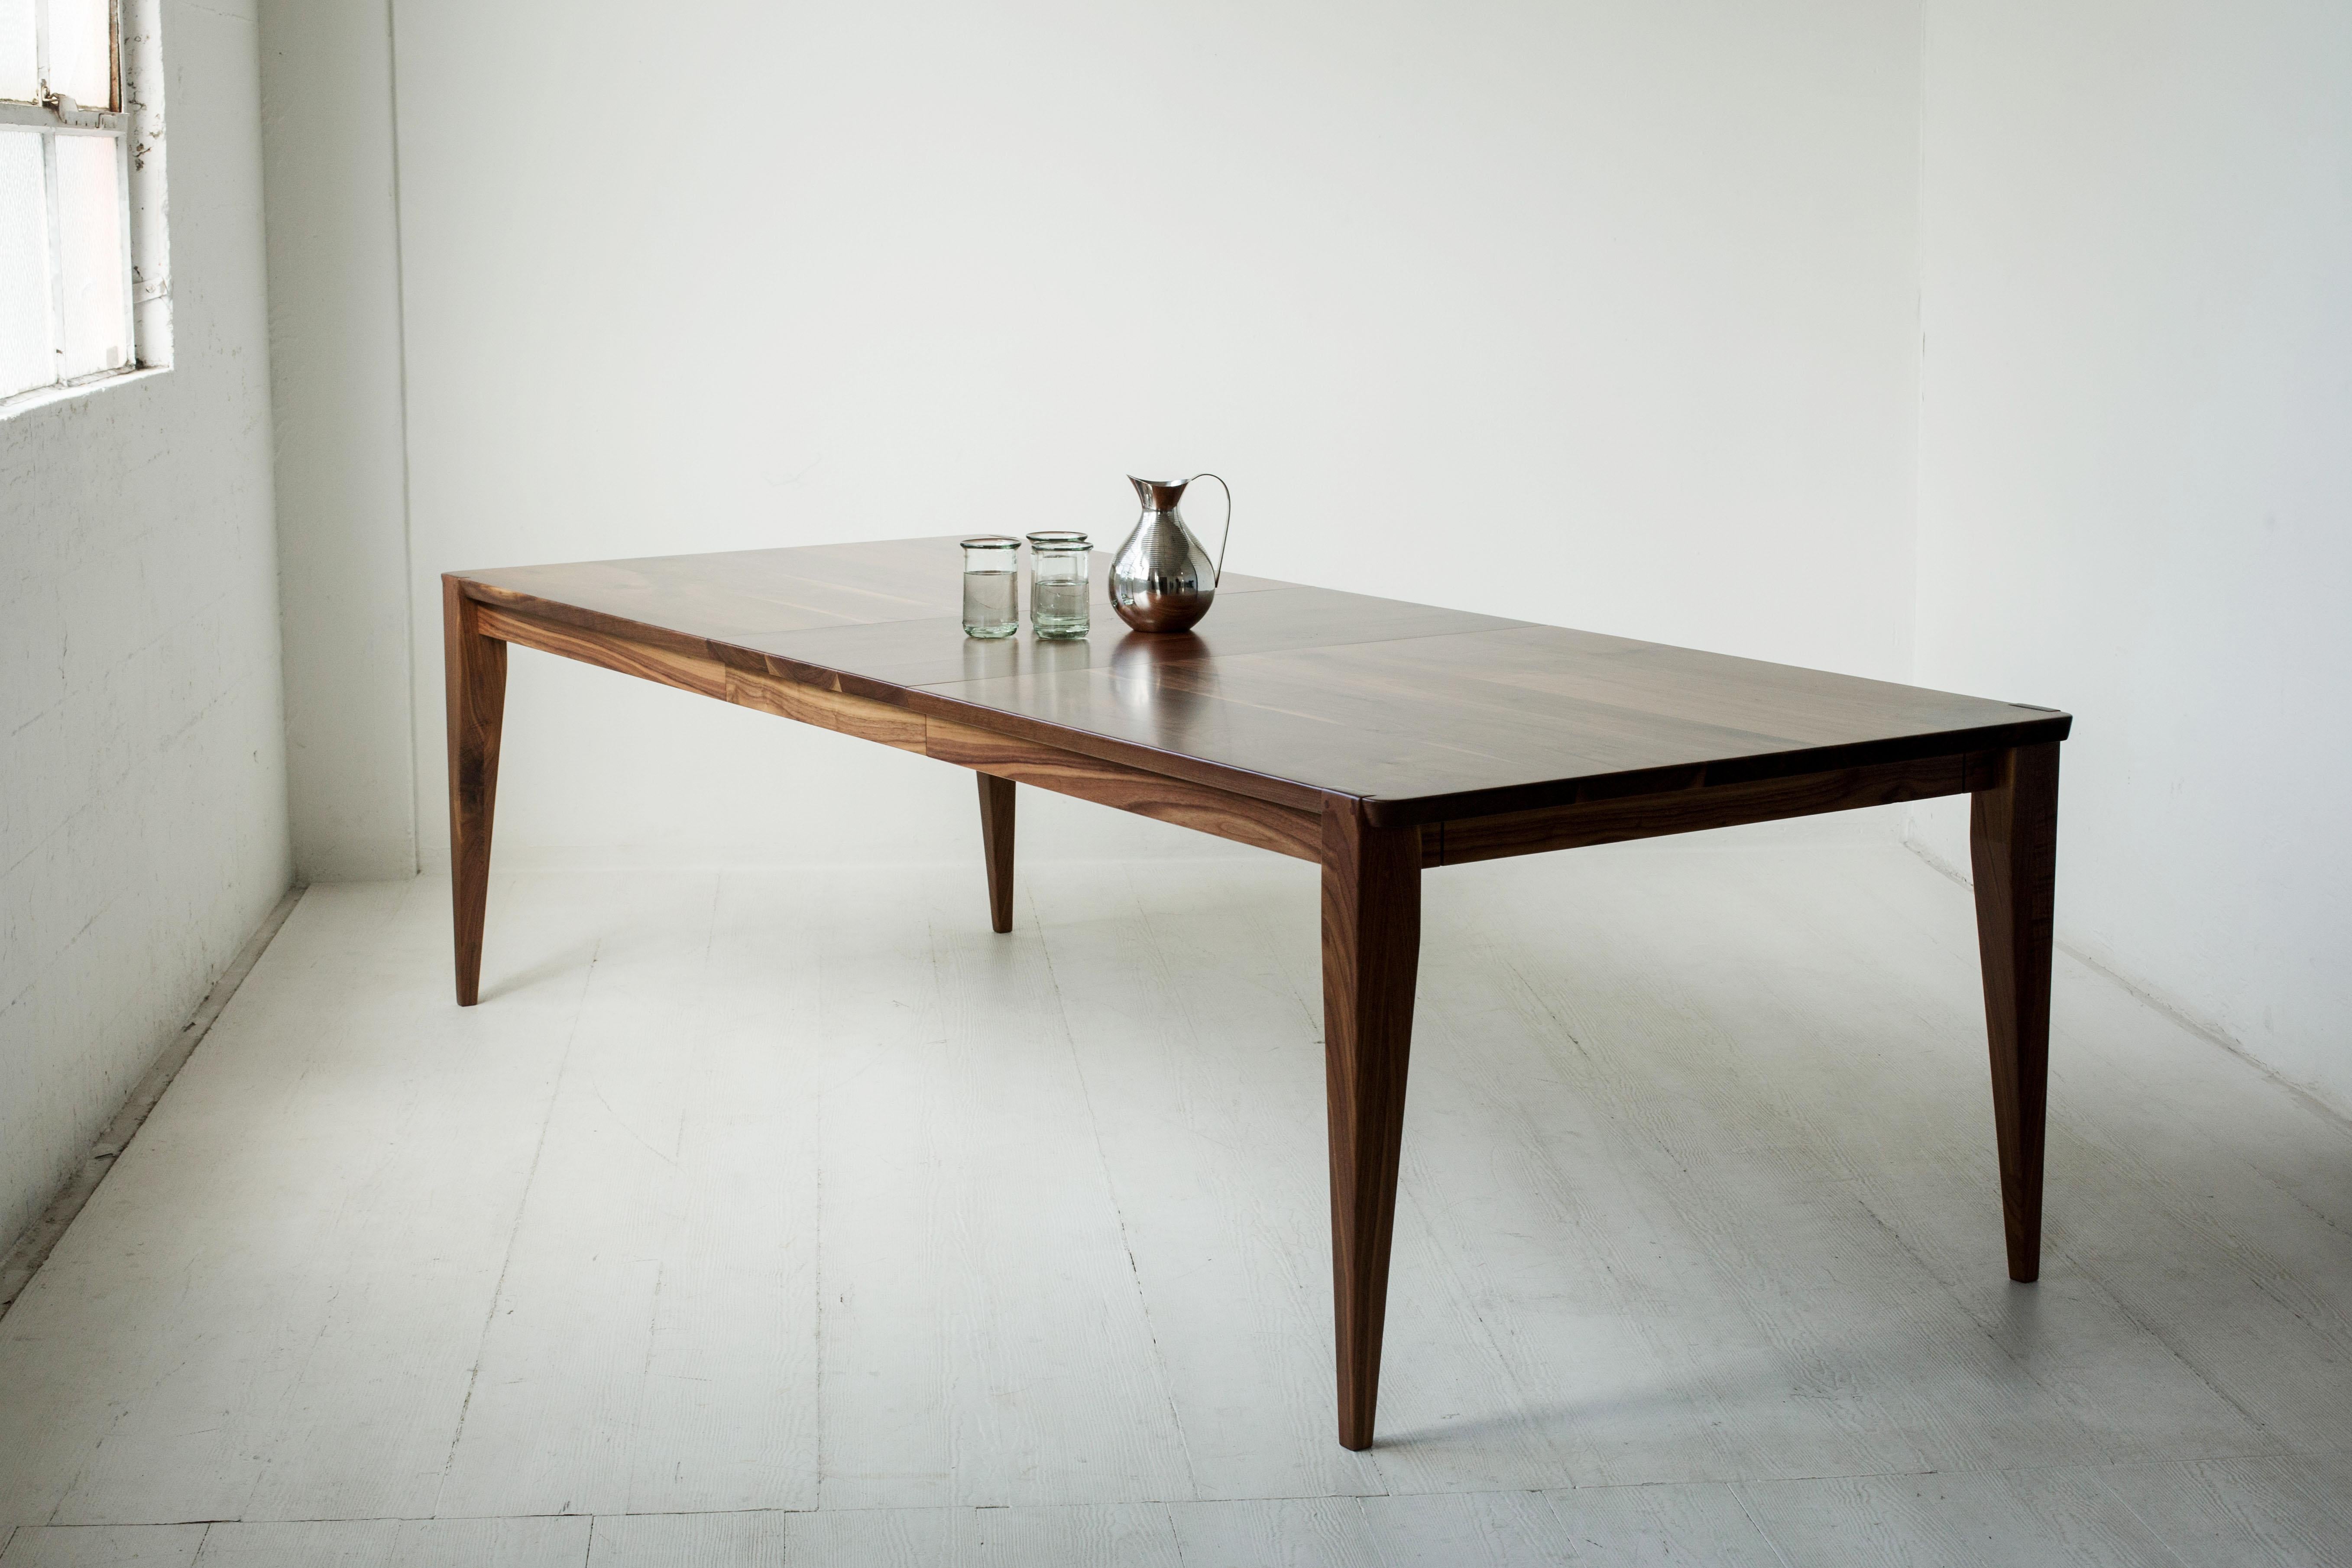 Extend the invitation to more family and friends. Our signature Oslo dining table is an ideal design for Expansion. Featuring our signature beveled edges, tapered legs, and notched joinery, this durable dining table is handcrafted with precision,